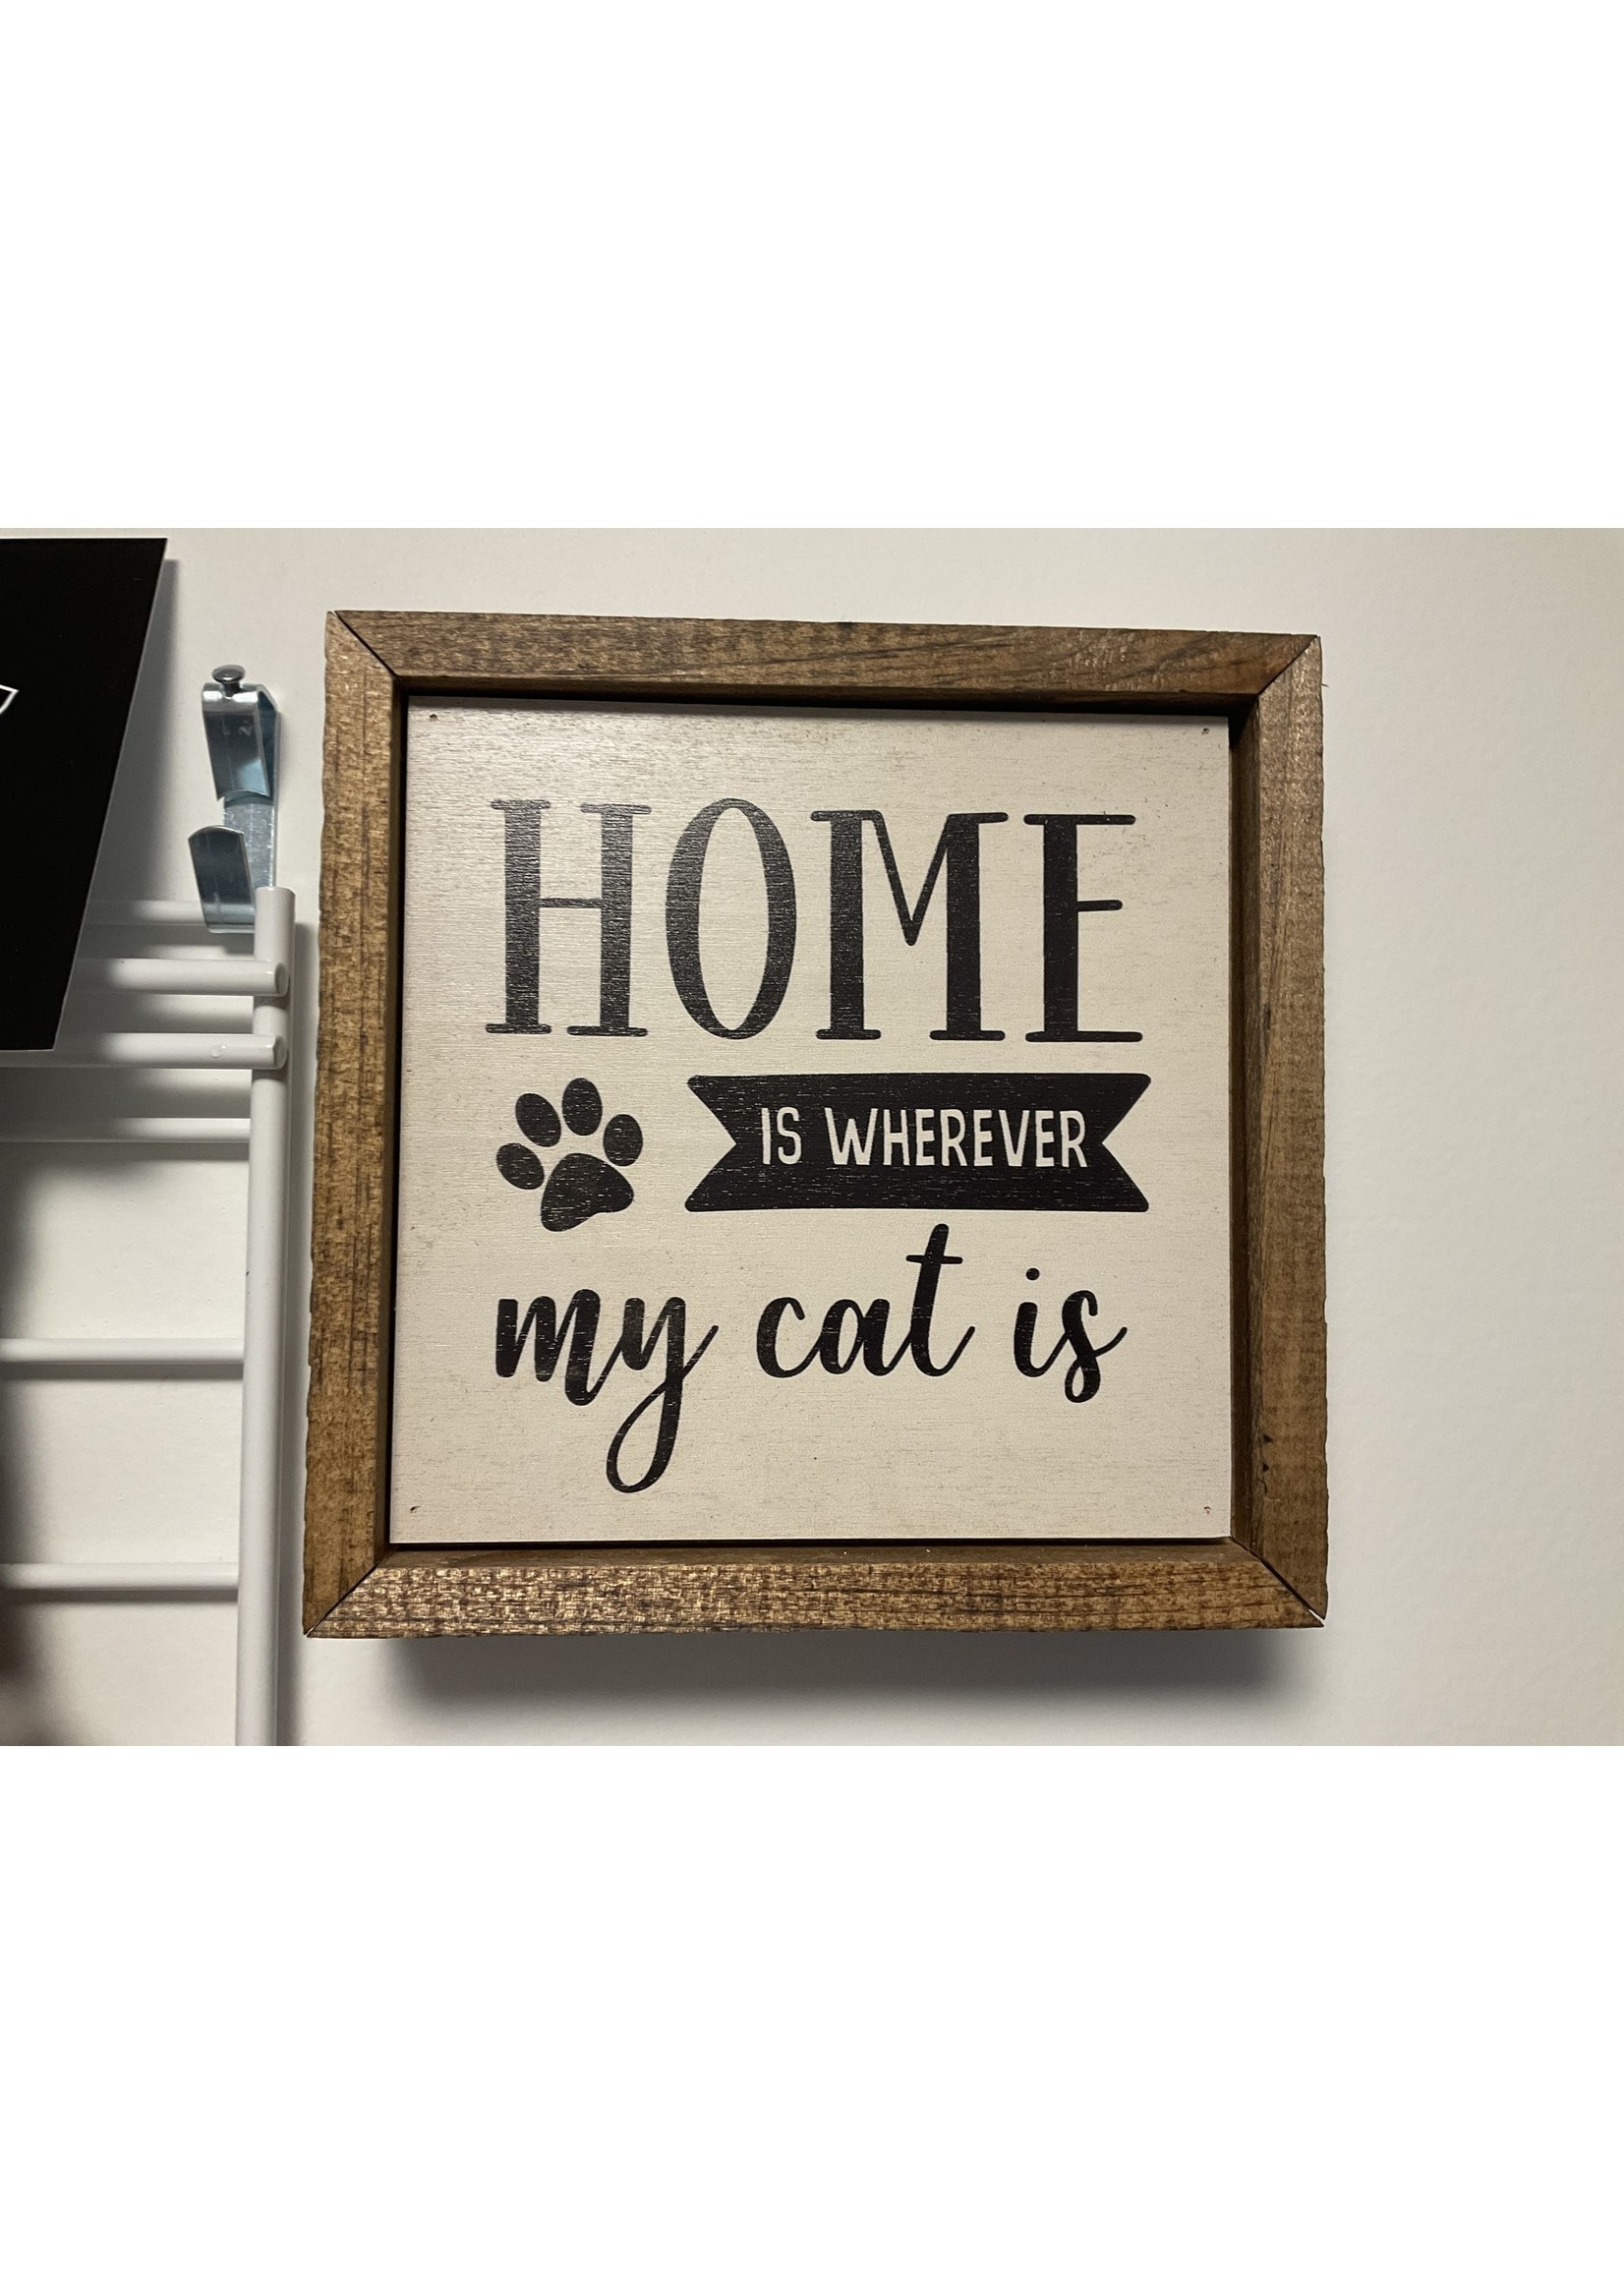 Driftless Studios Sign 6x6 Home is Where My Cat Is